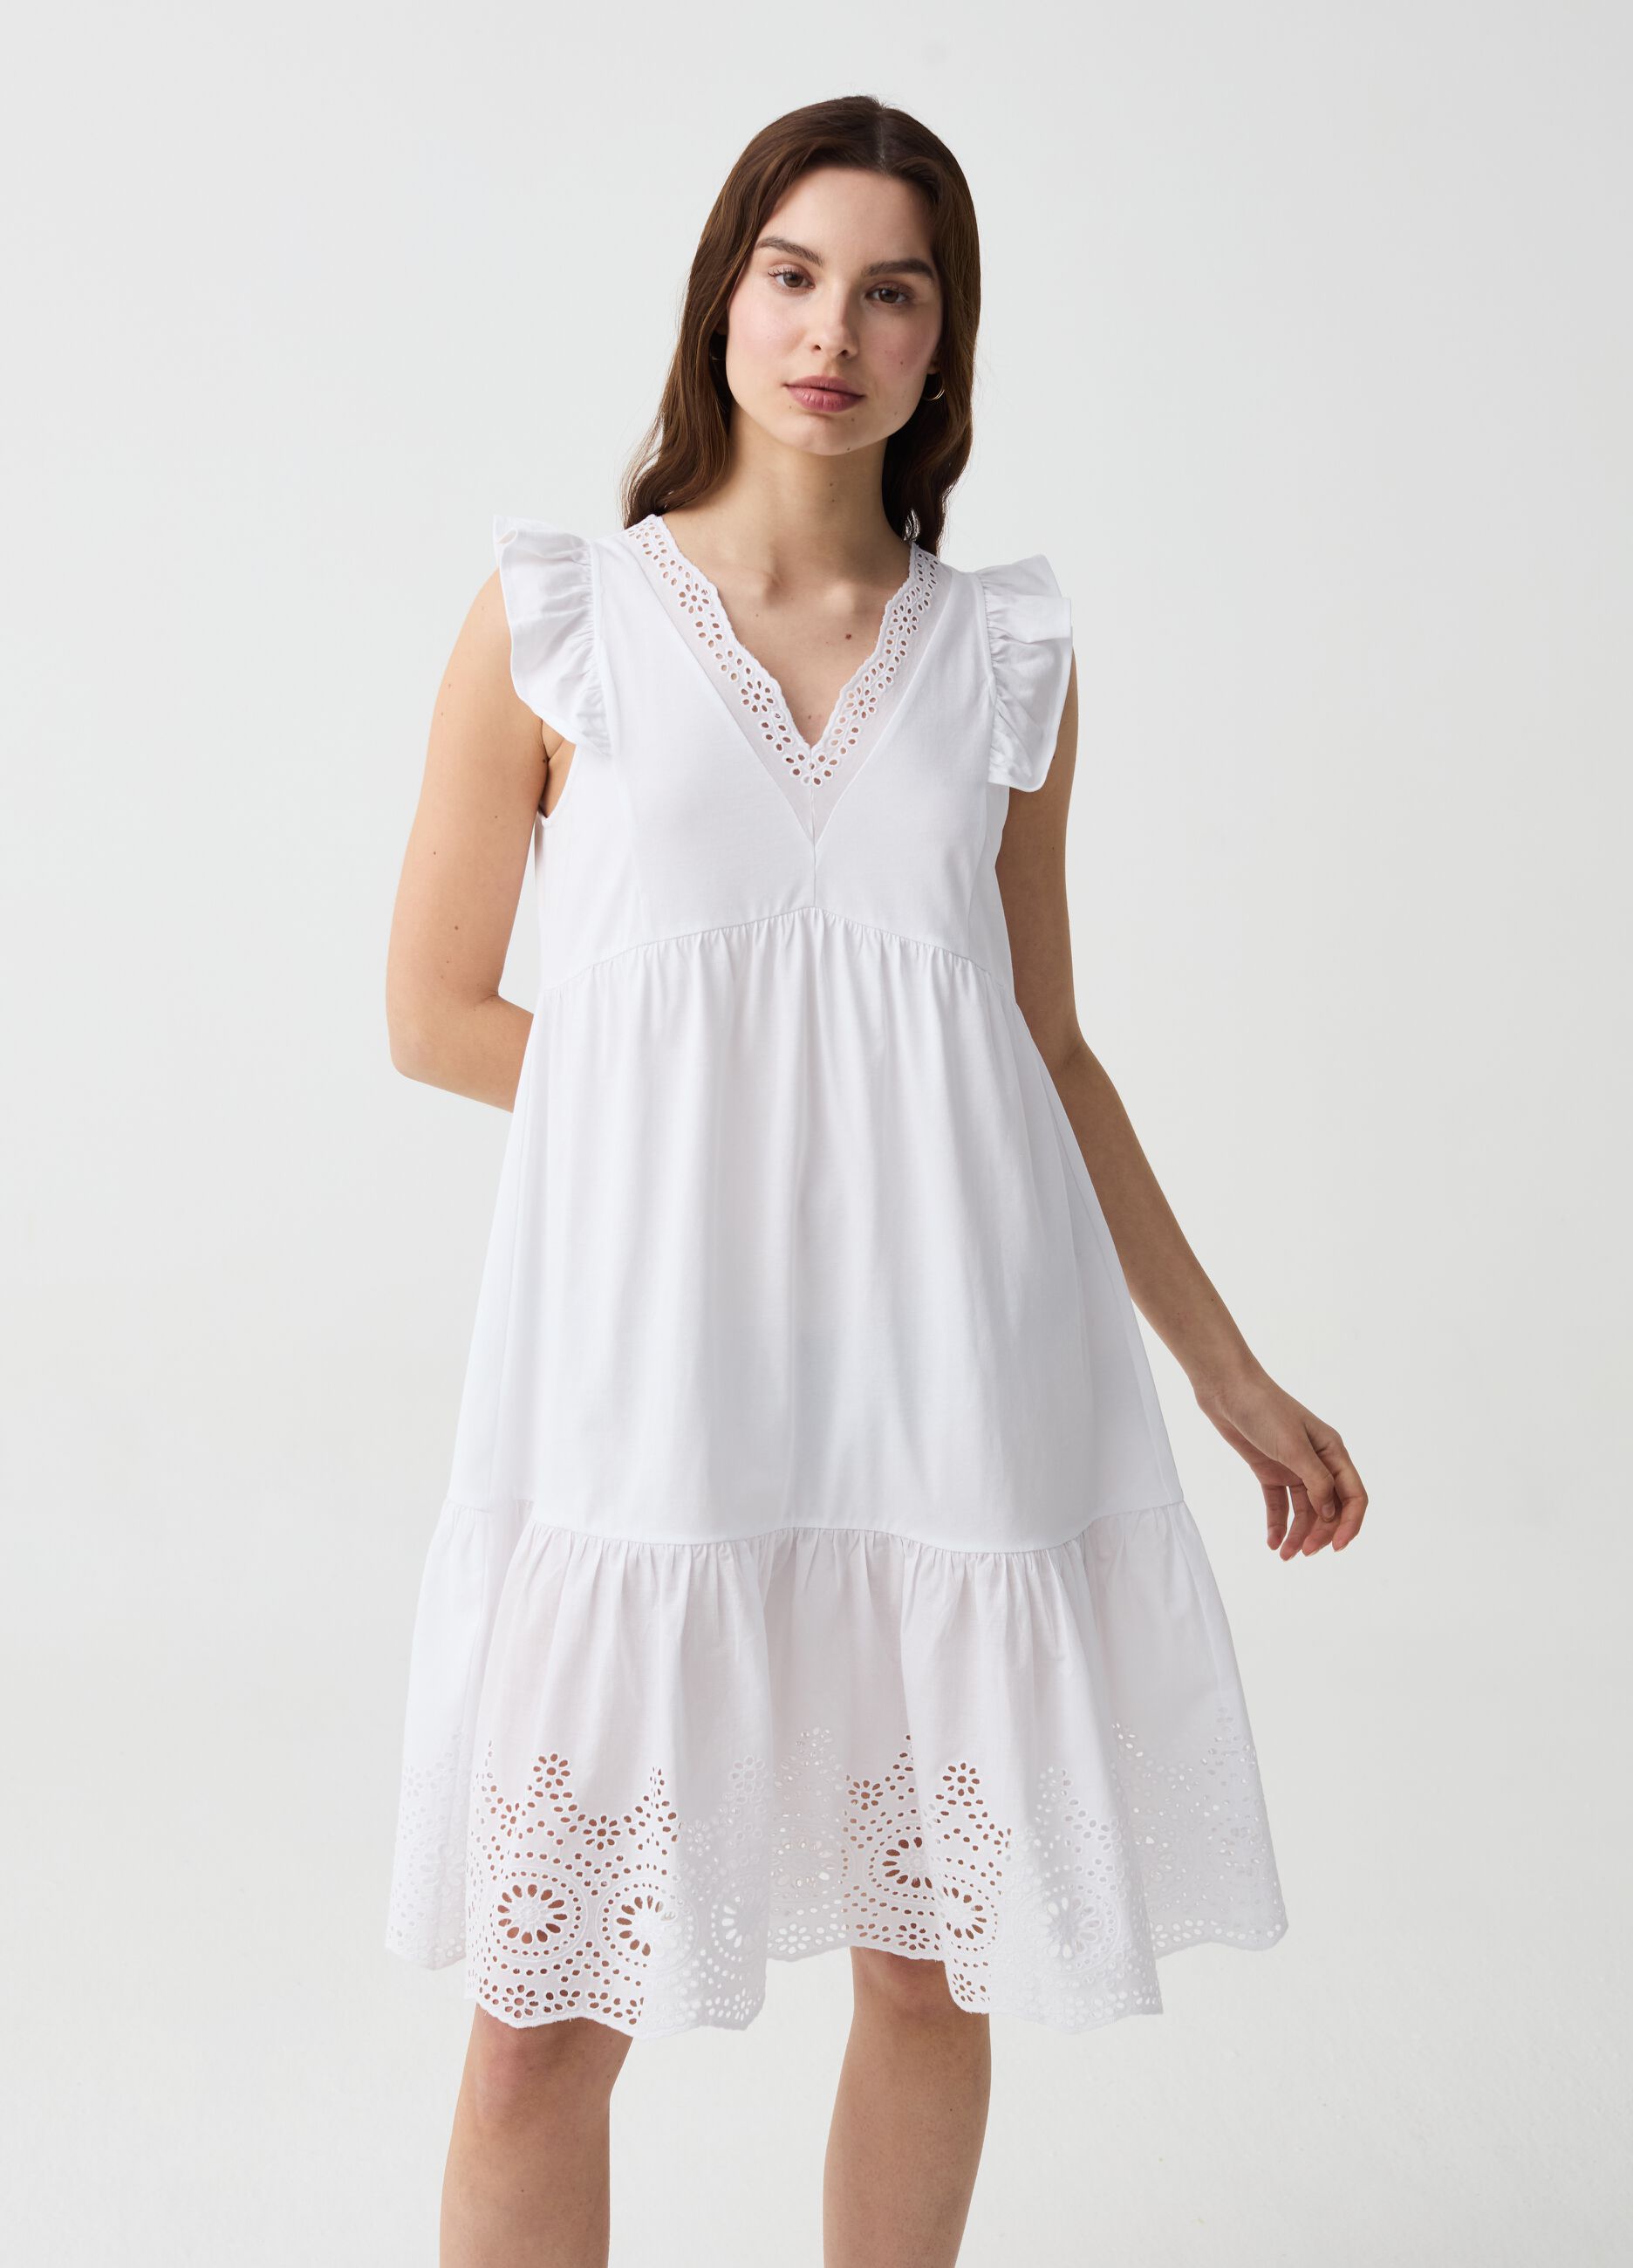 Short tiered dress with broderie anglaise details